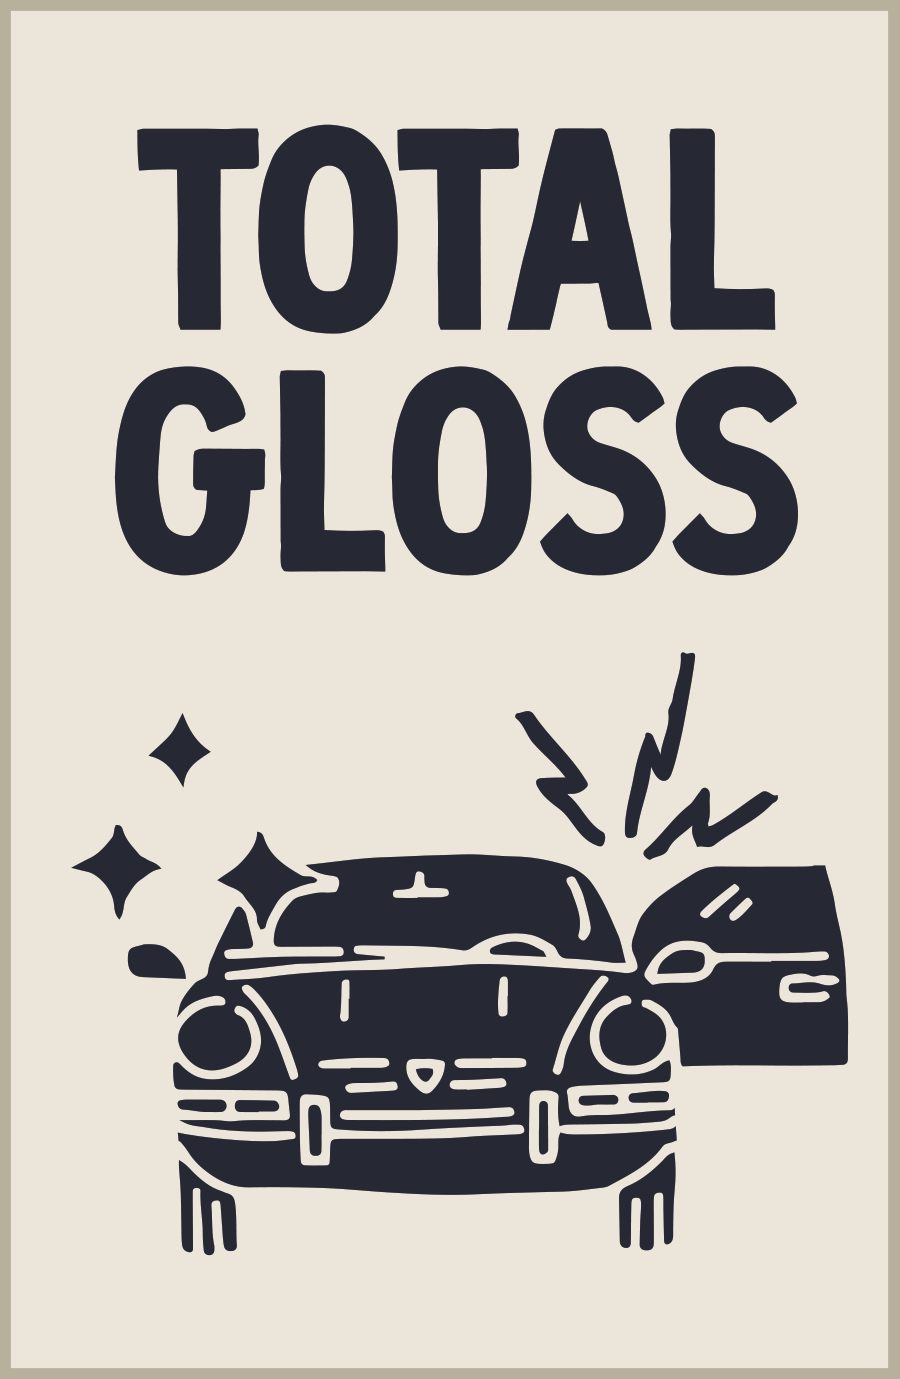 Total Gloss car care package: Sign with car, broken glass, black numbers and letters on white background, car illustration. Includes glossy tires, ceramic paint booster, essential oils, and more.